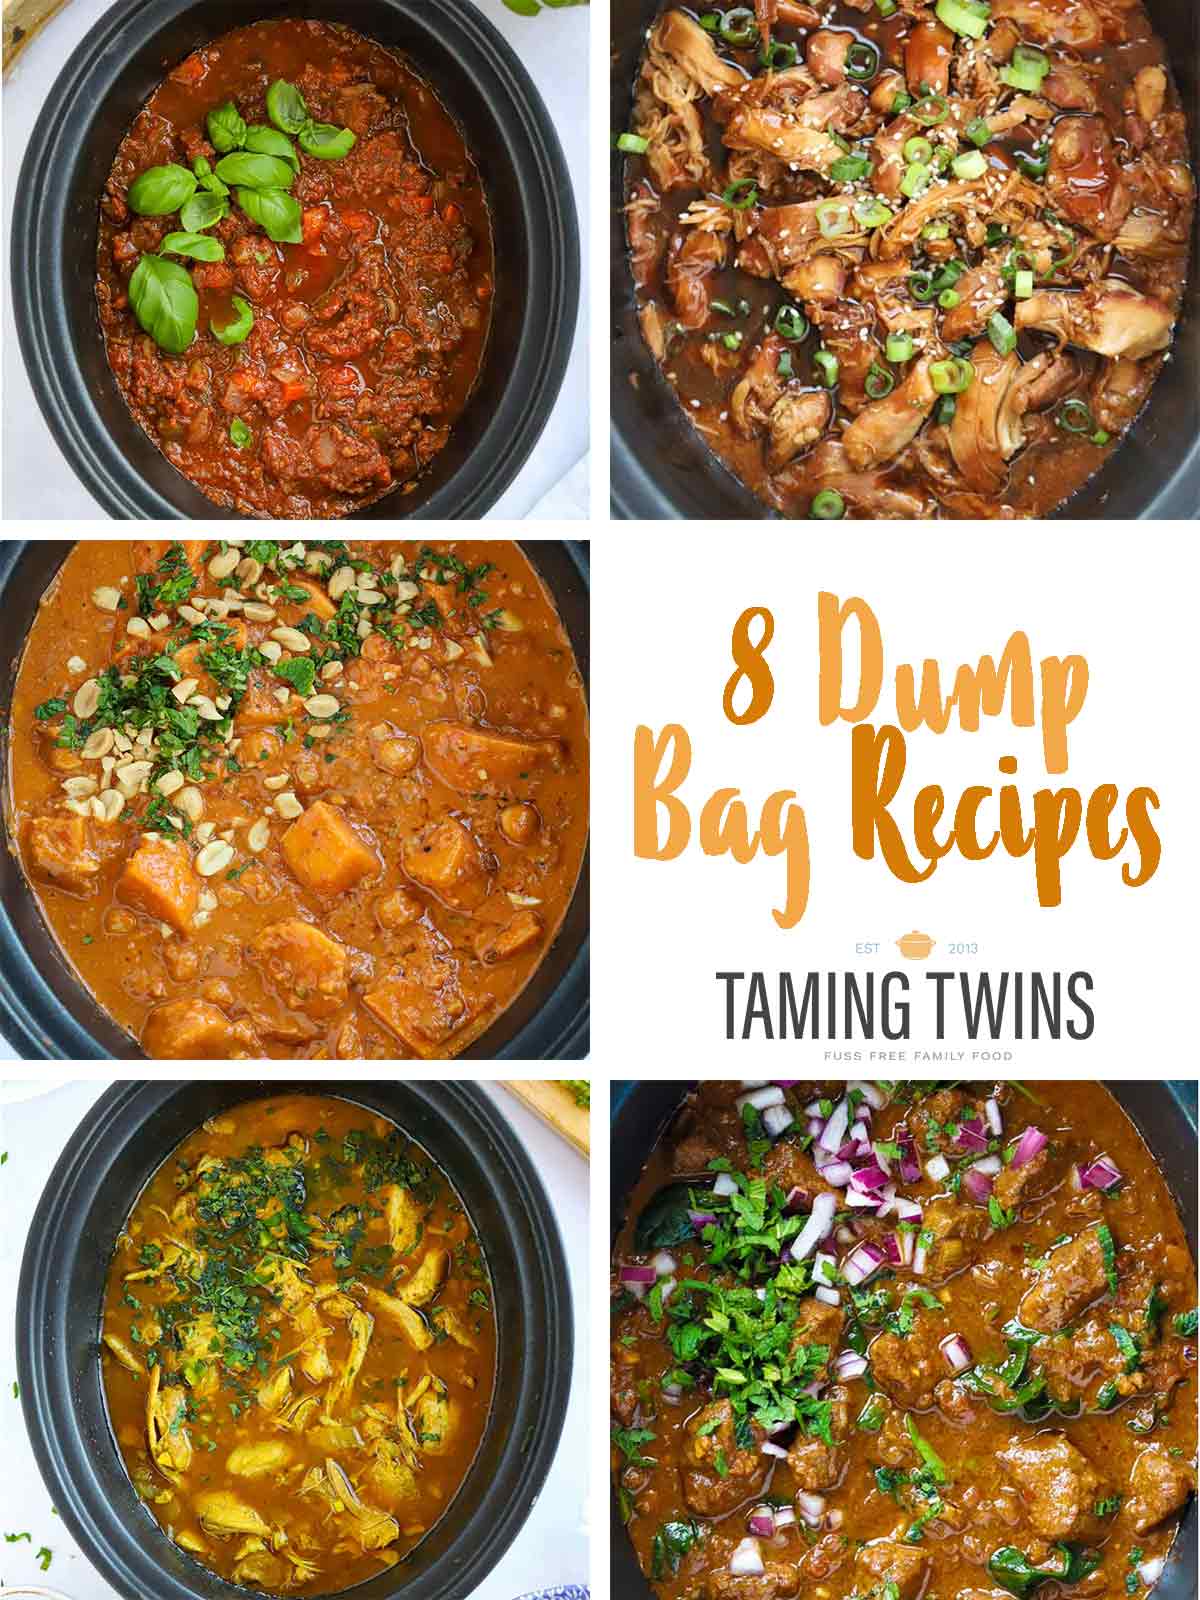 Slow Cooker Recipe & Tips - I tried the oven bag idea and I love